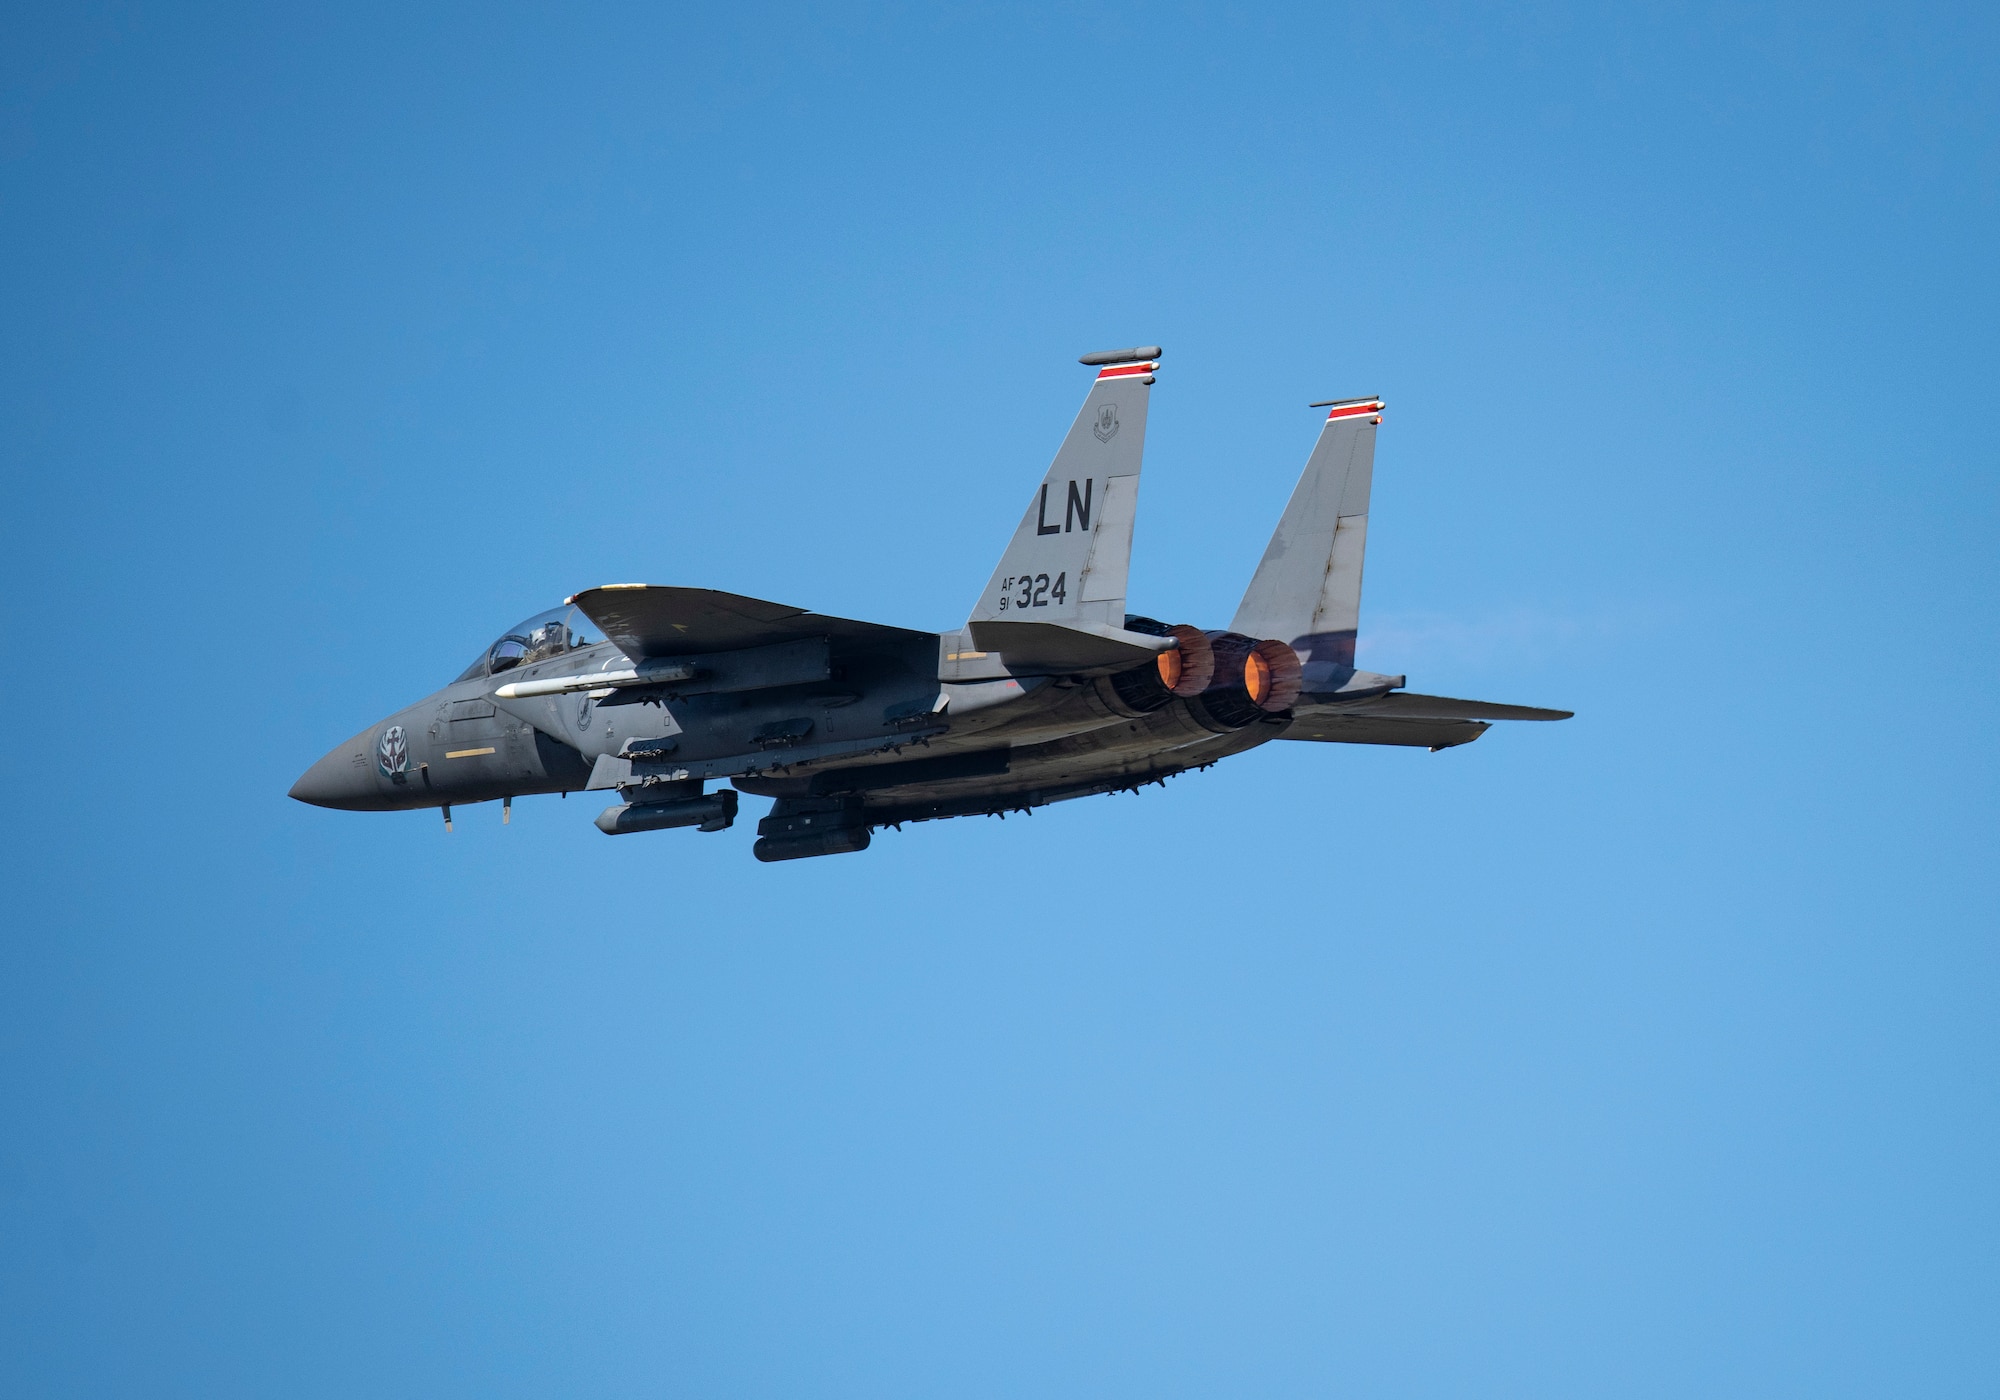 An F-15E Strike Eagle assigned to the 494th Fighter Squadron launches for a training sortie from Royal Air Force Lakenheath, England, April 15, 2020. The 494th FS conducts daily routine training to ensure the Liberty Wing brings unique air combat capabilities to the fight when called upon by United States Air Forces in Europe-Air Forces Africa. (U.S. Air Force photo by Airman 1st Class Madeline Herzog)